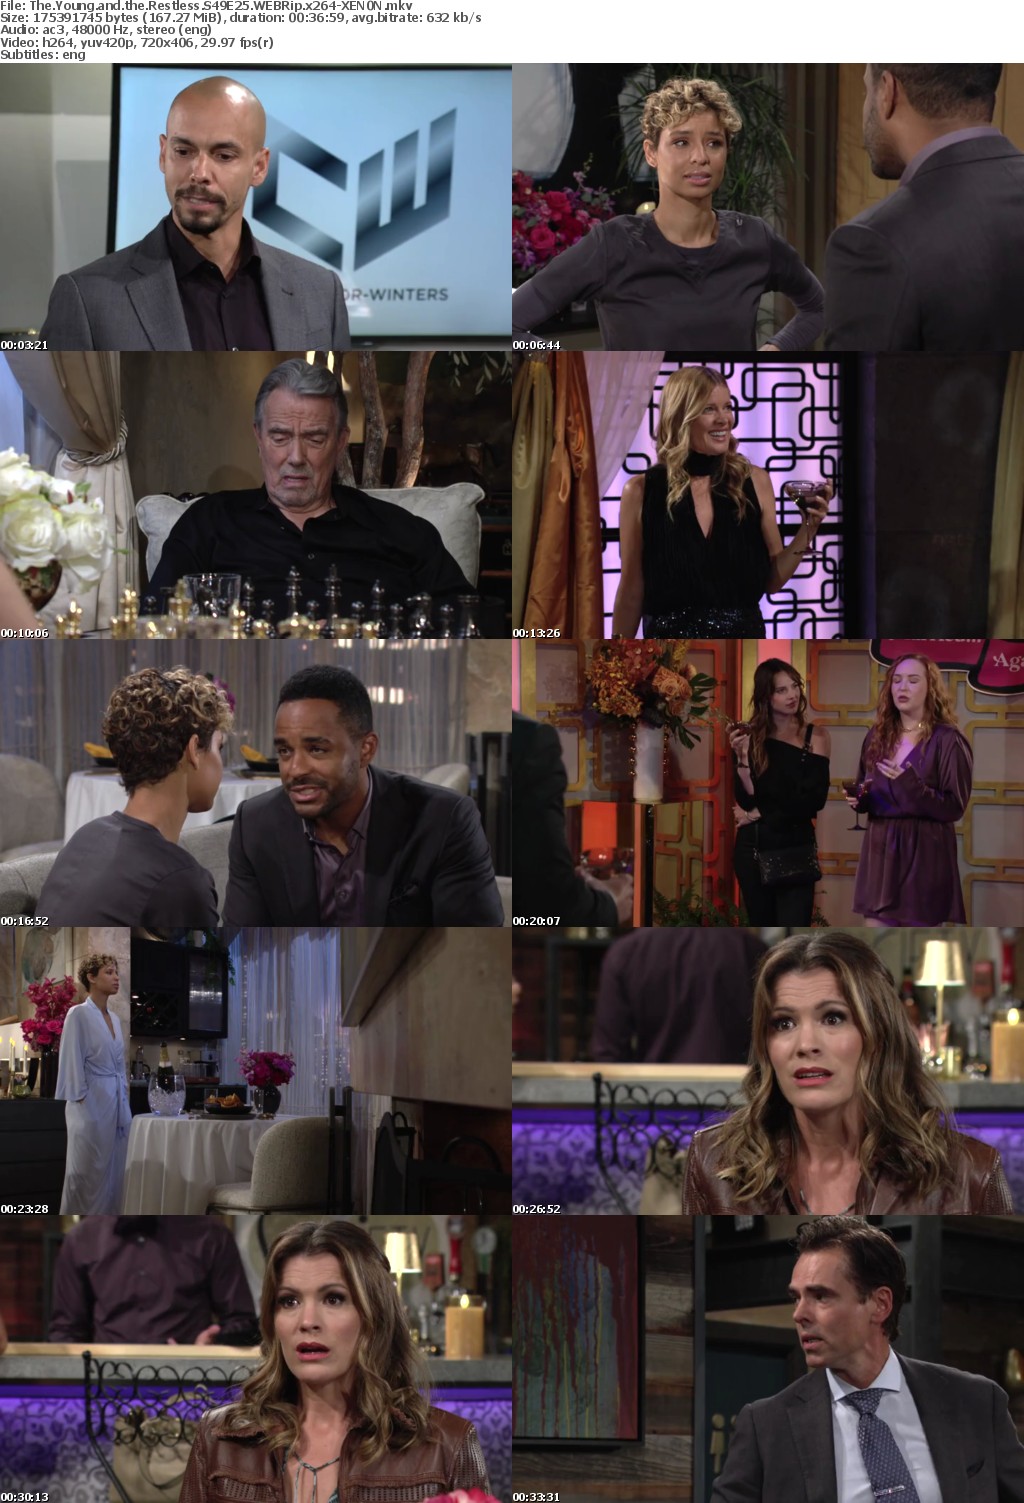 The Young and the Restless S49E25 WEBRip x264-XEN0N